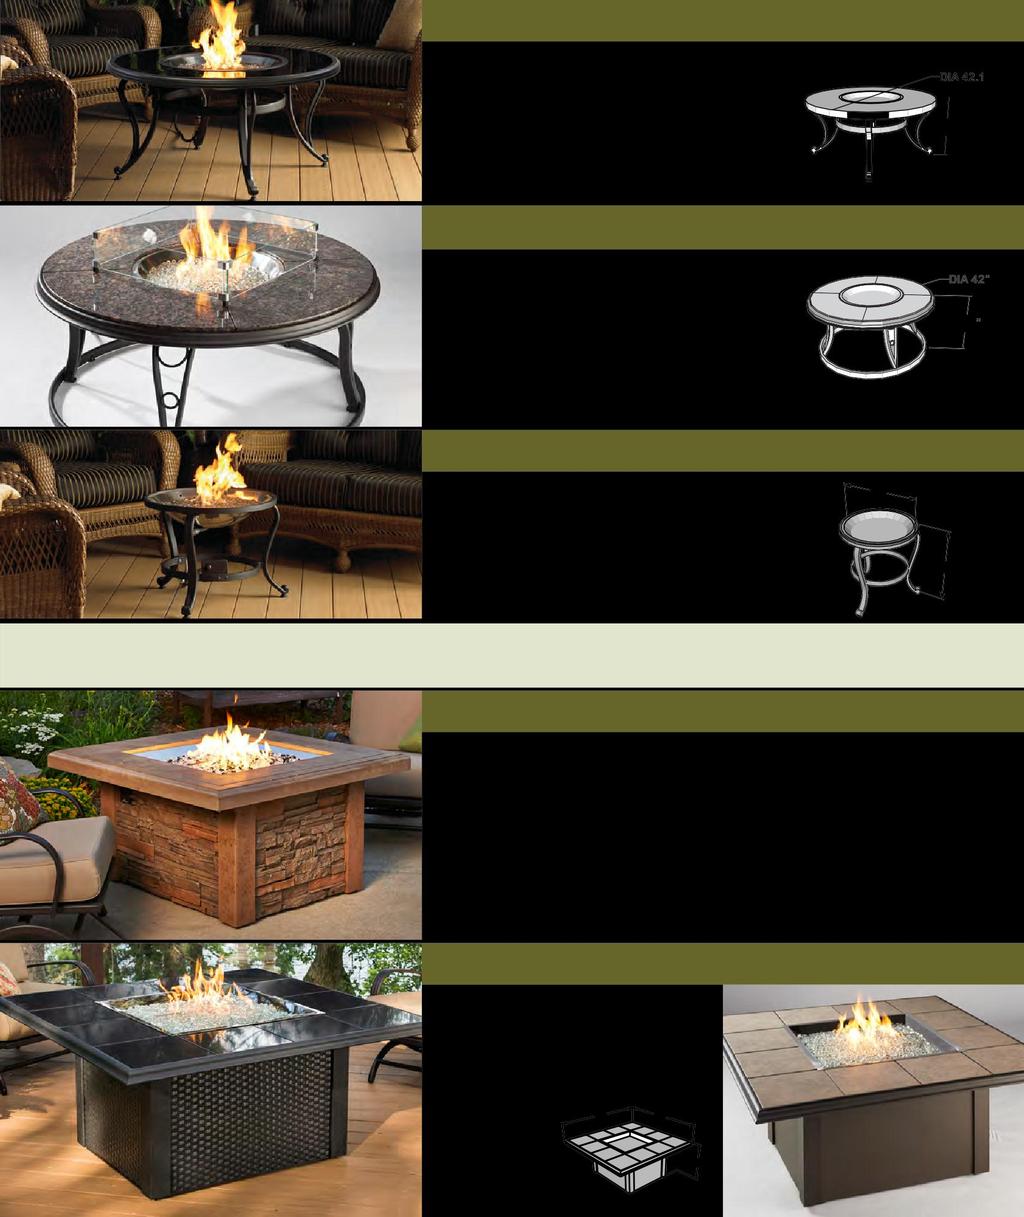 r o u n d f i r e p i t t a b l e s B l a c k G l a s s F i r e P i t T a b l e The elegant, functional fire table Powder coated aluminum frame in Dora Brown color Tempered 42 round black